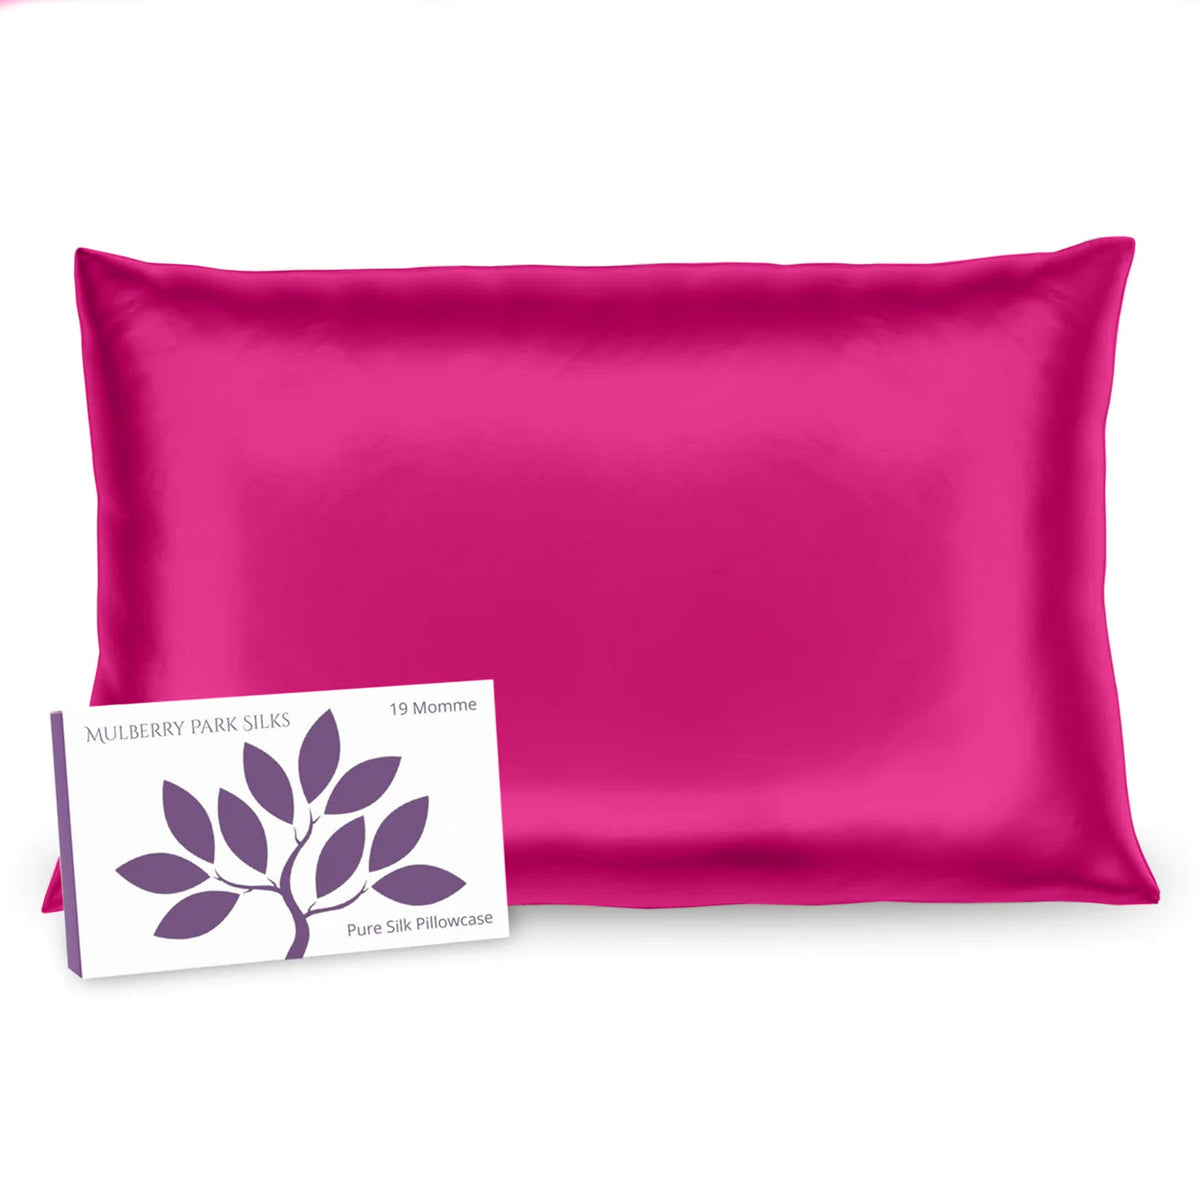 Mulberry Park Silks Deluxe 19 Momme Pure Silk Pillowcase in Magenta Color with Box